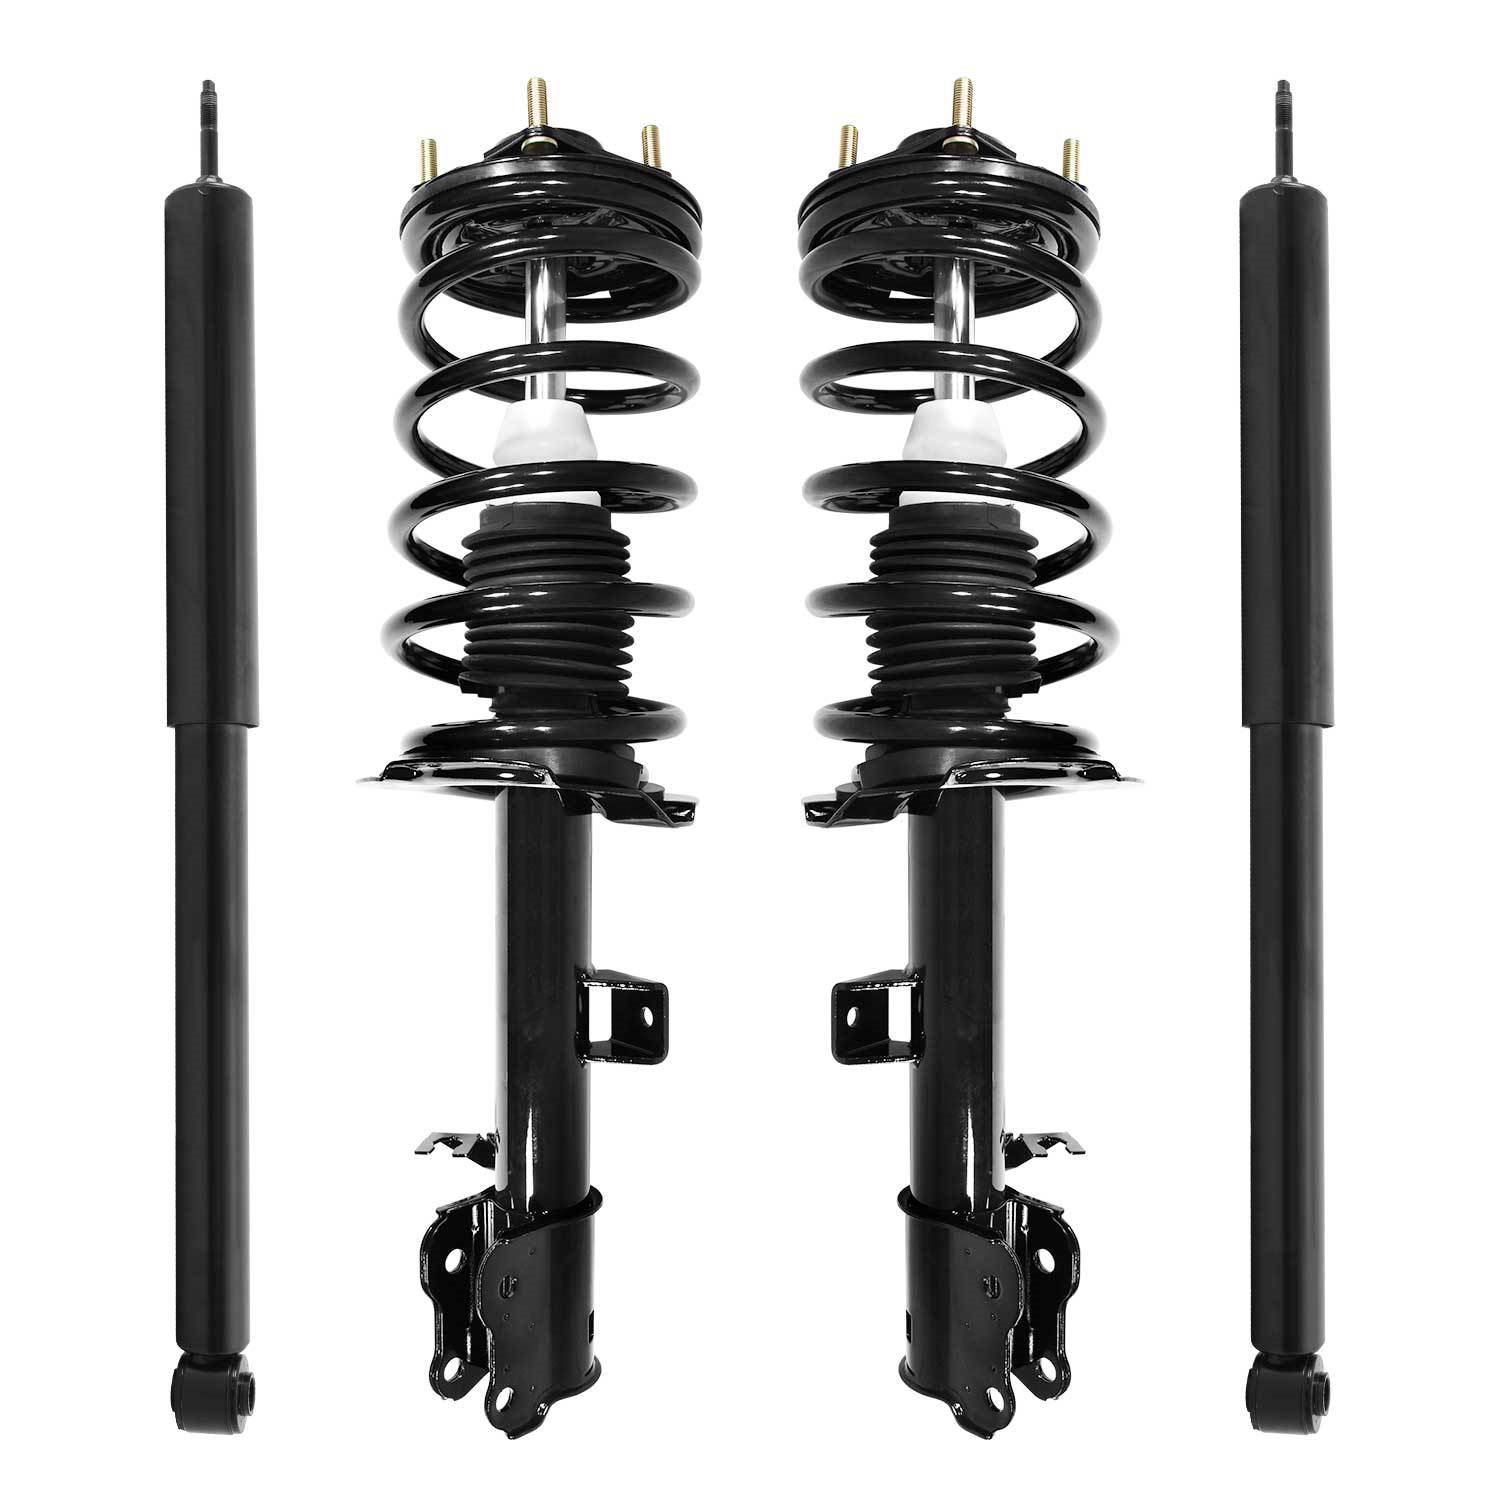 4-11621-252040-001 Front & Rear Suspension Strut & Coil Spring Assembly Fits Select Ford/Mercury/Mazda